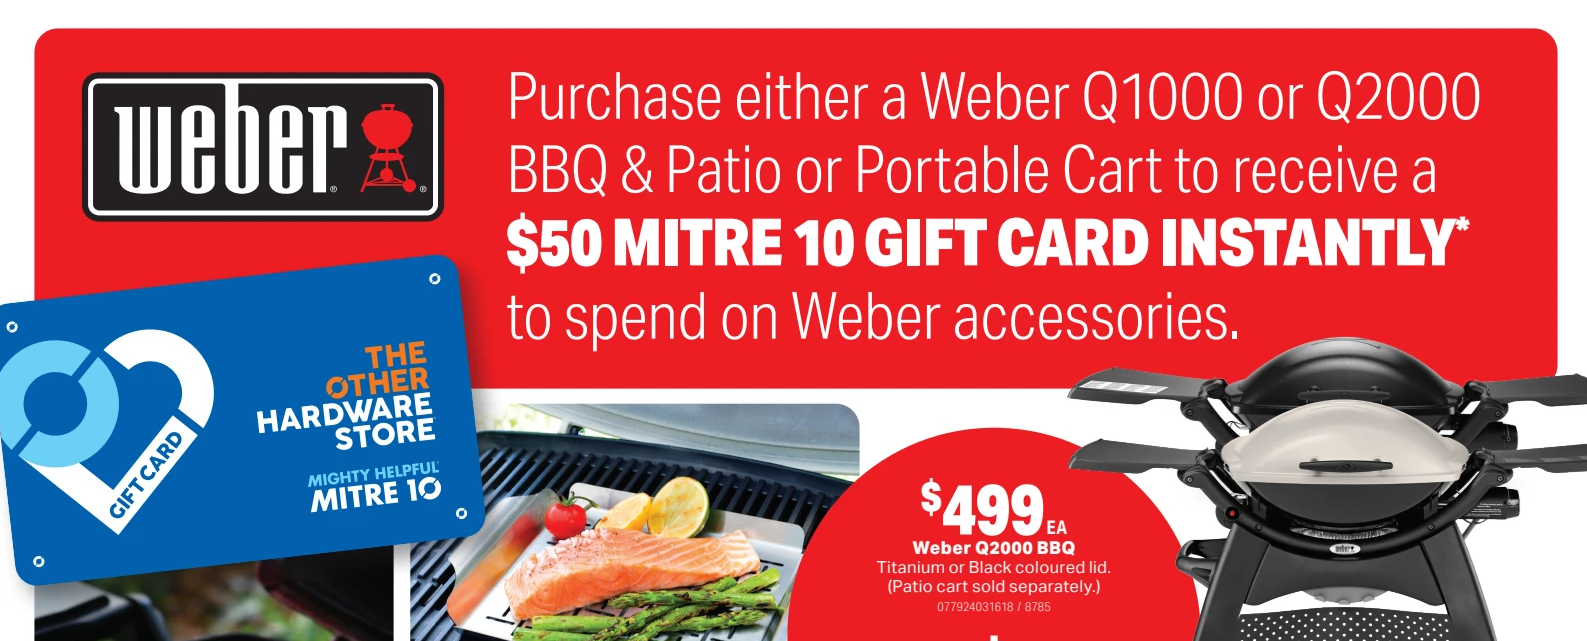 Get $50 Mitre 10 gift card instantly when you buy a Weber Q1000 or Q2000 BBQ &Patio or Portable cart